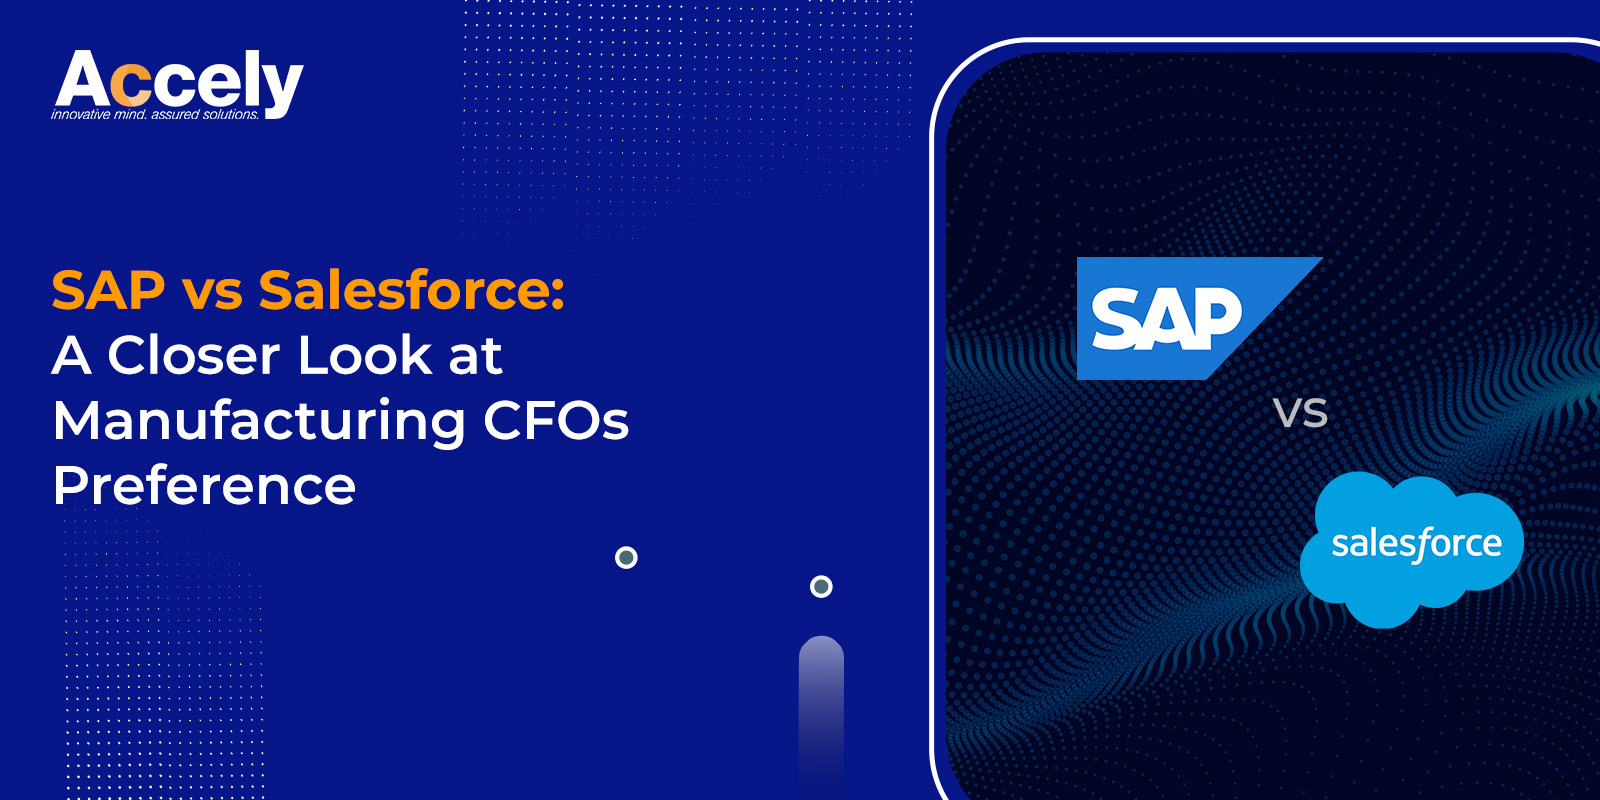 SAP vs Salesforce: A Closer Look at Manufacturing CFOs Preference